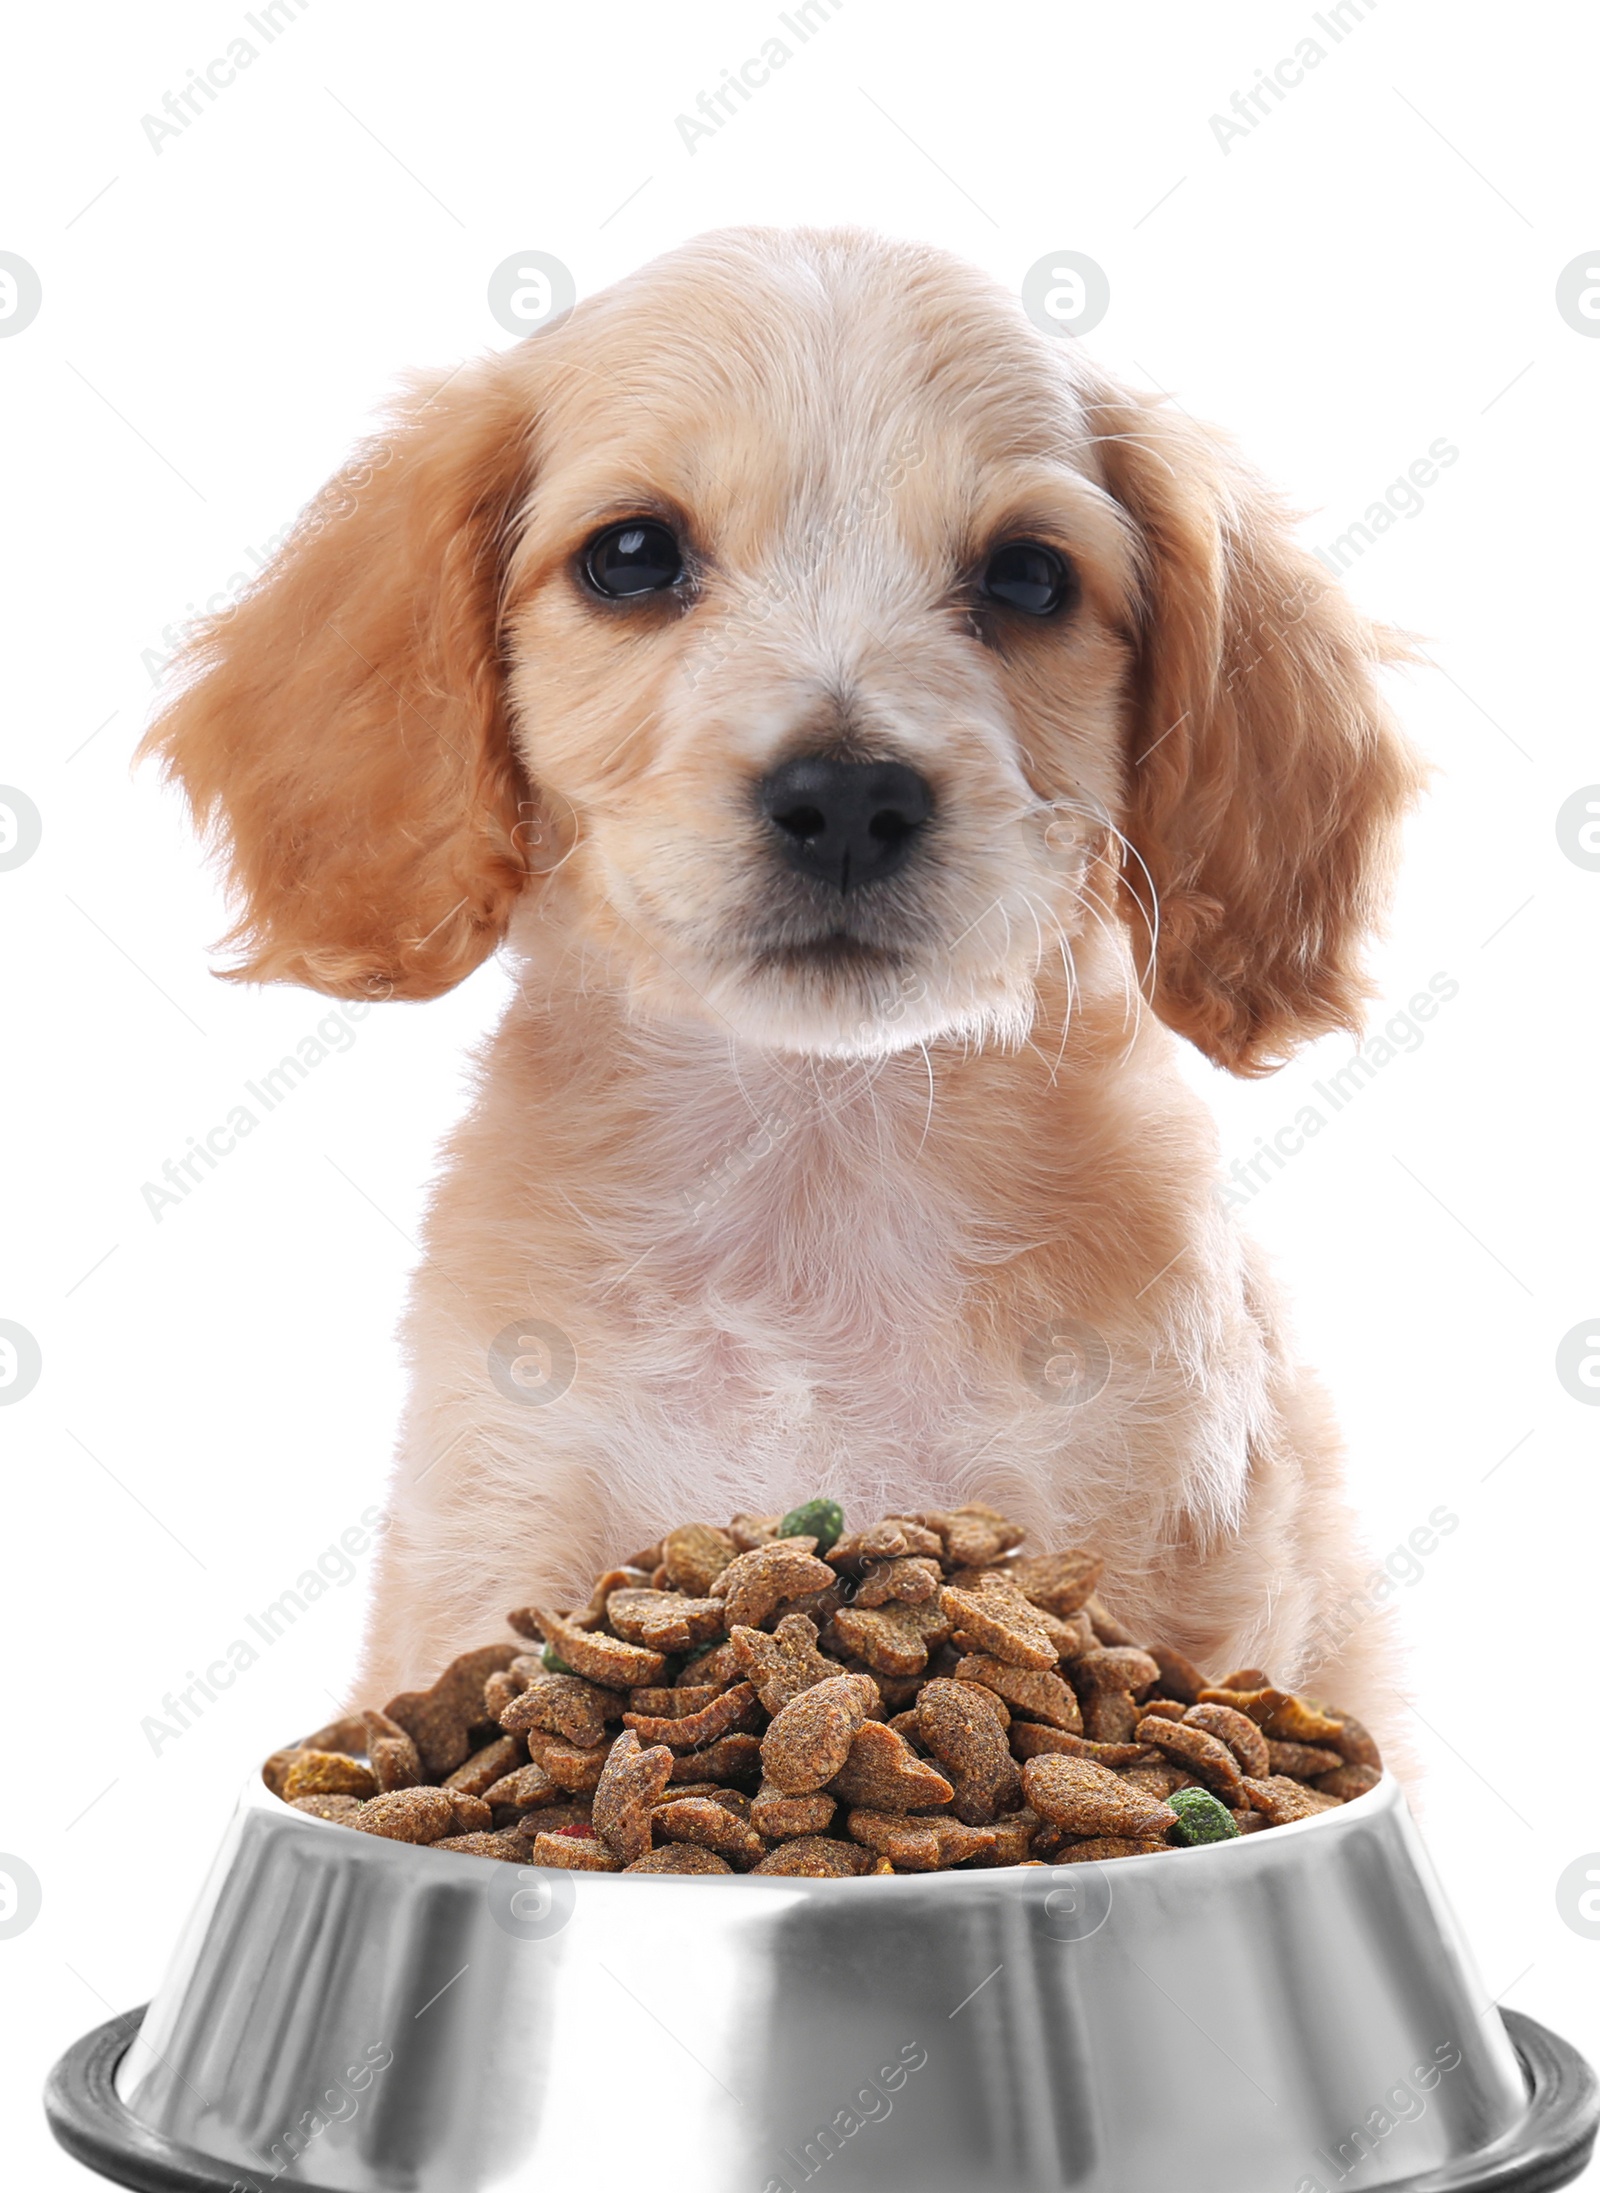 Image of Cute English Cocker Spaniel puppy and feeding bowl with dog food on white background